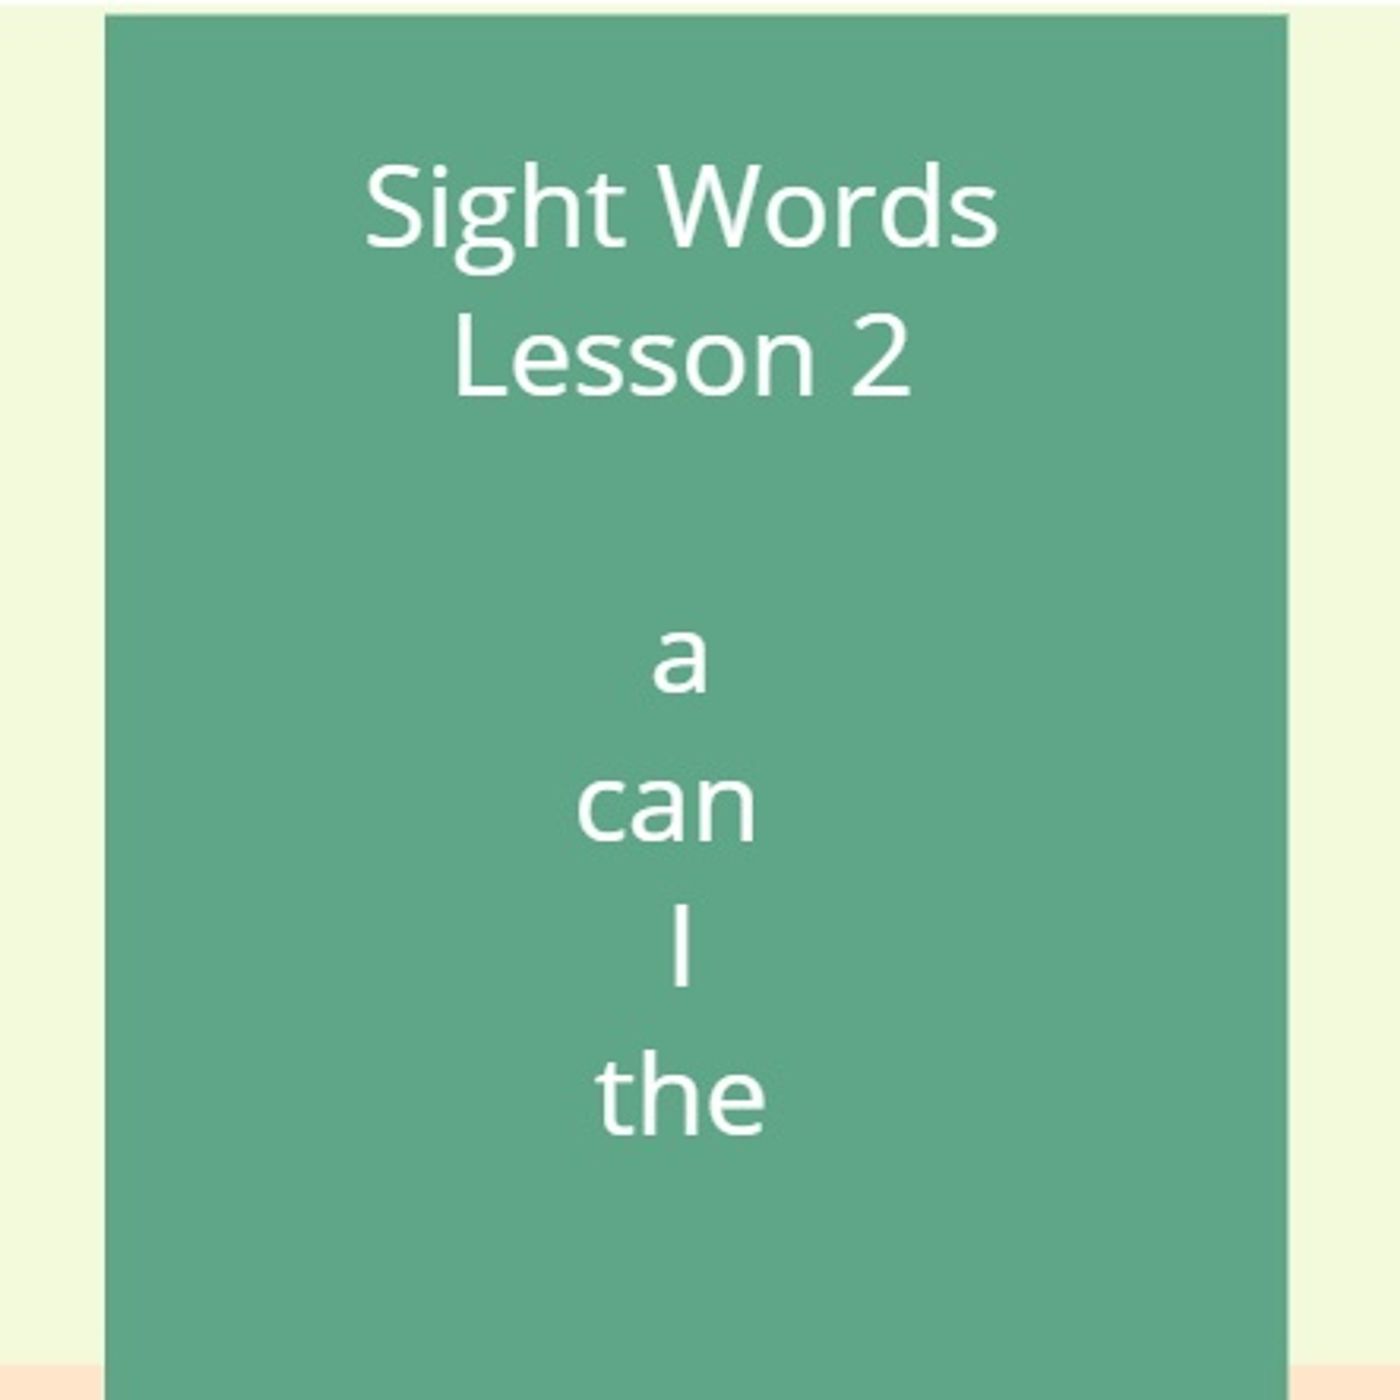 Sight Words Lesson 2